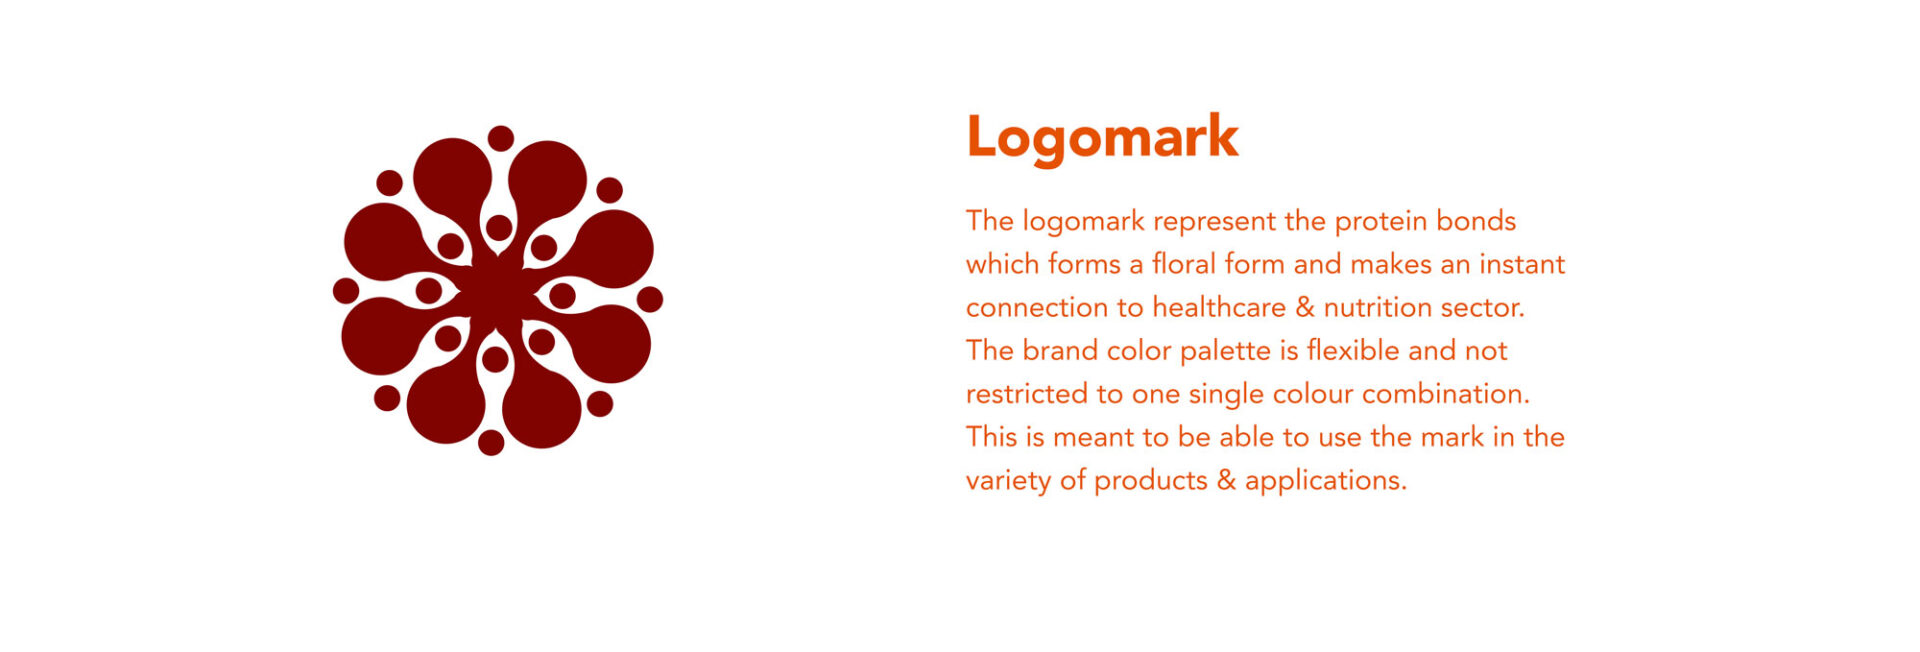 healthcare-logomark-meaning-branding-design-protein-powder-product-packaging-strategy-pro360-reinaphics-creatives-chennai-india